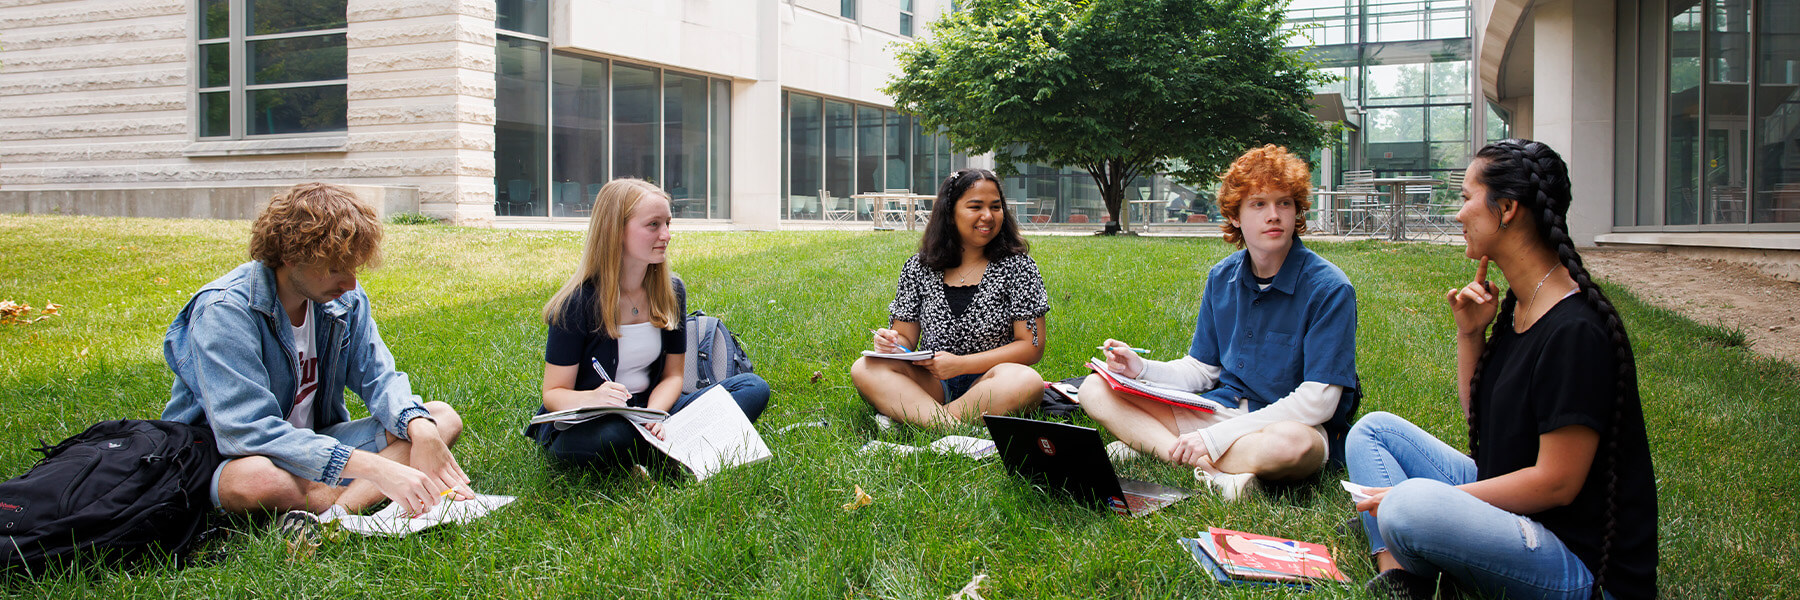 A group of students studying on the grass.